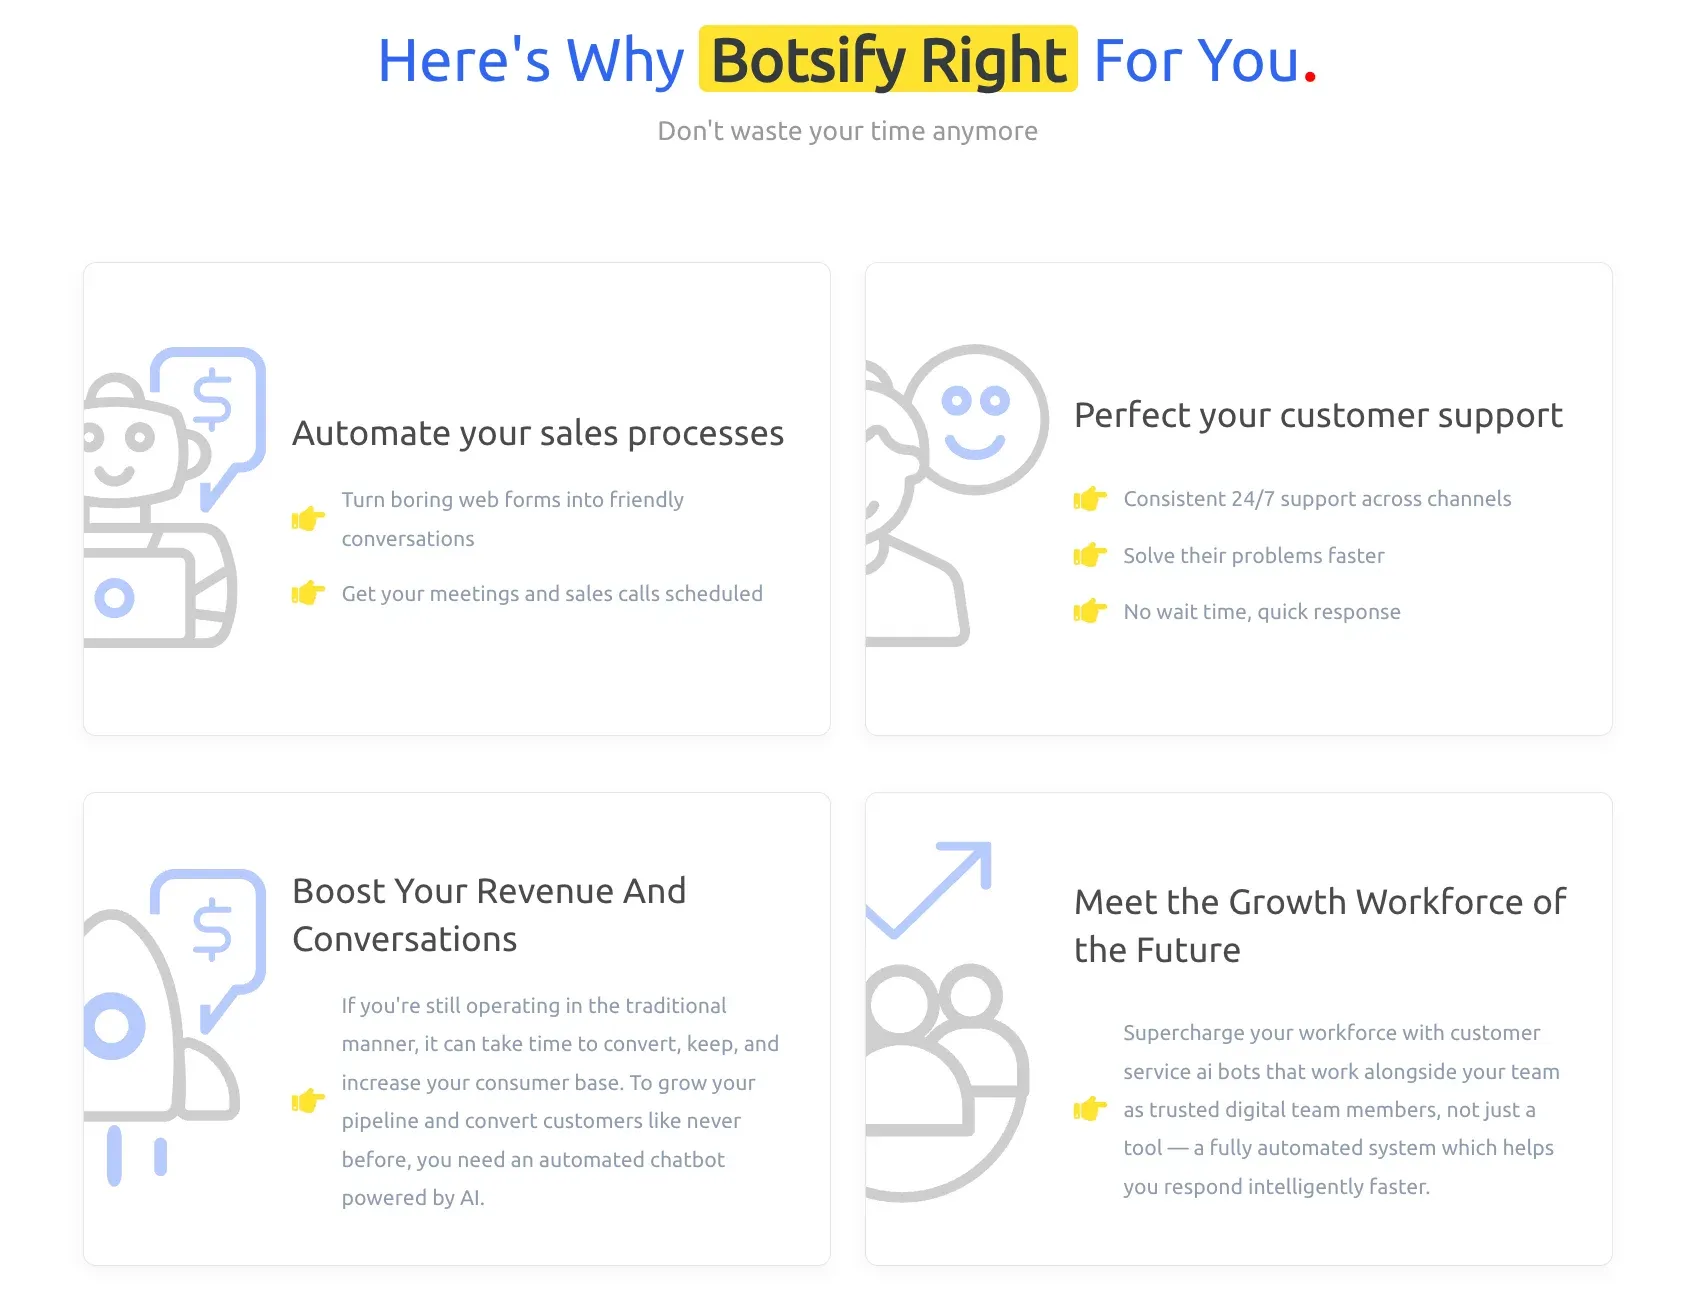 Top 10 Features of Botsify